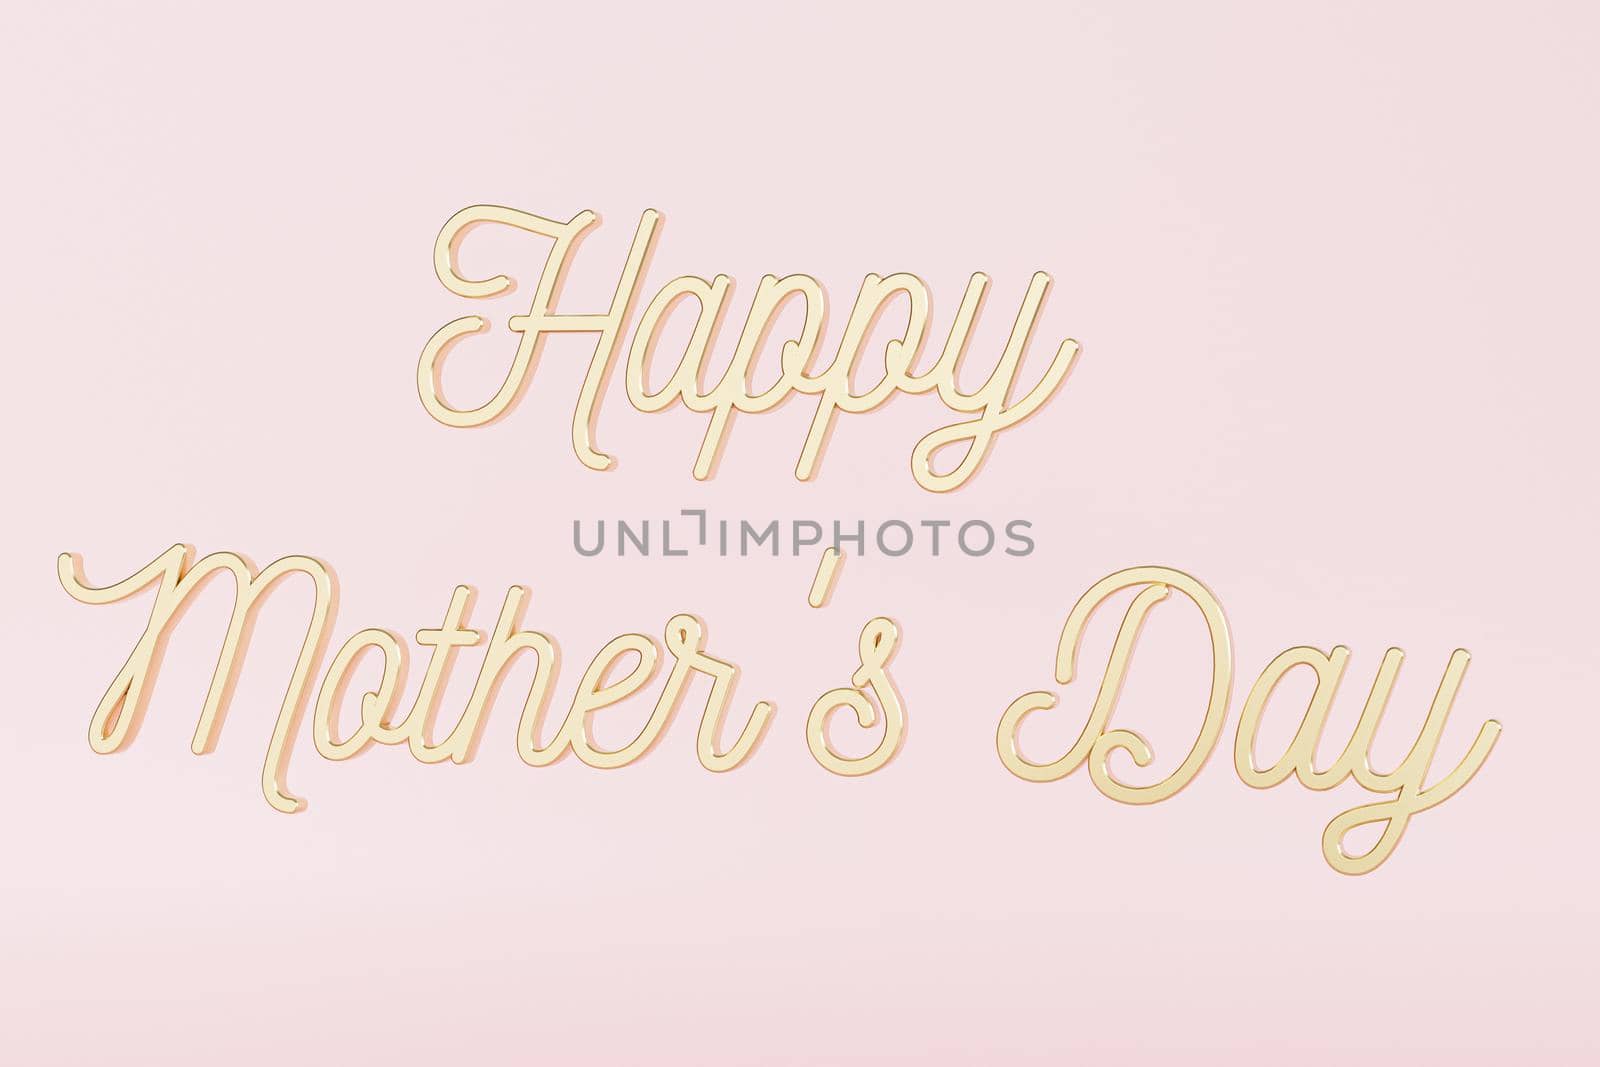 Mother's day greeting card, golden lettering text or calligraphy on pink background, 3d render illustration by Frostroomhead